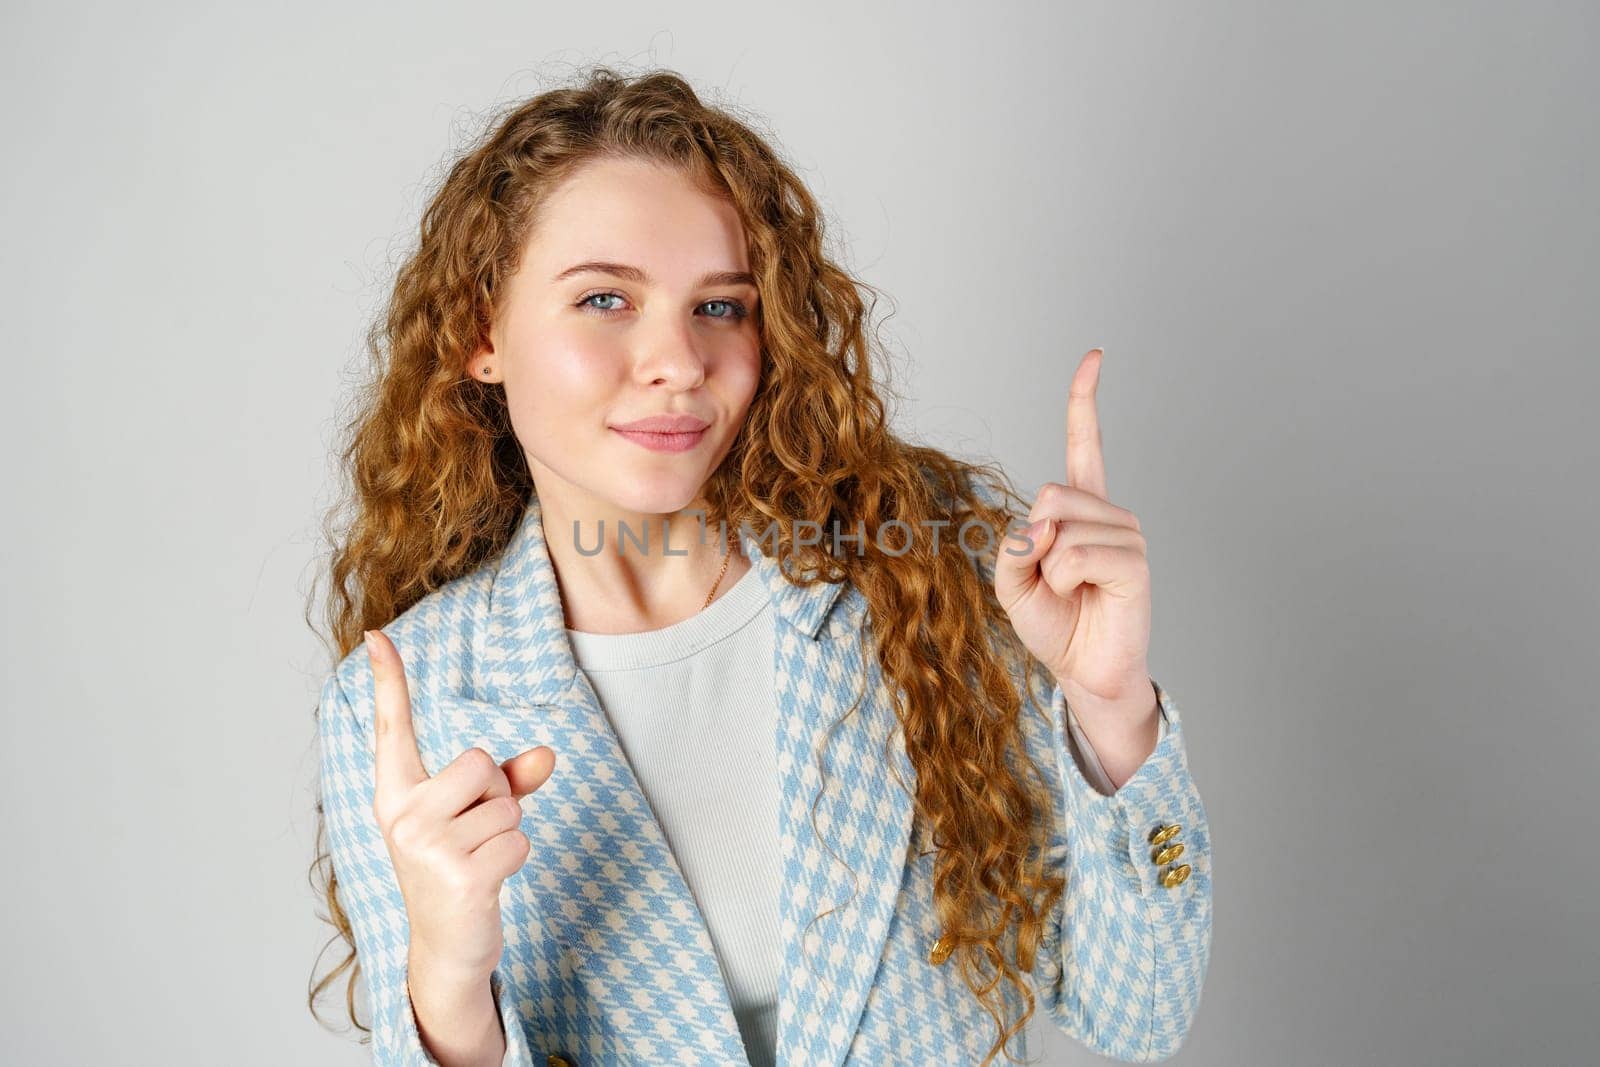 Young Woman With Curly Hair Pointing Upwards in a Studio Setting close up